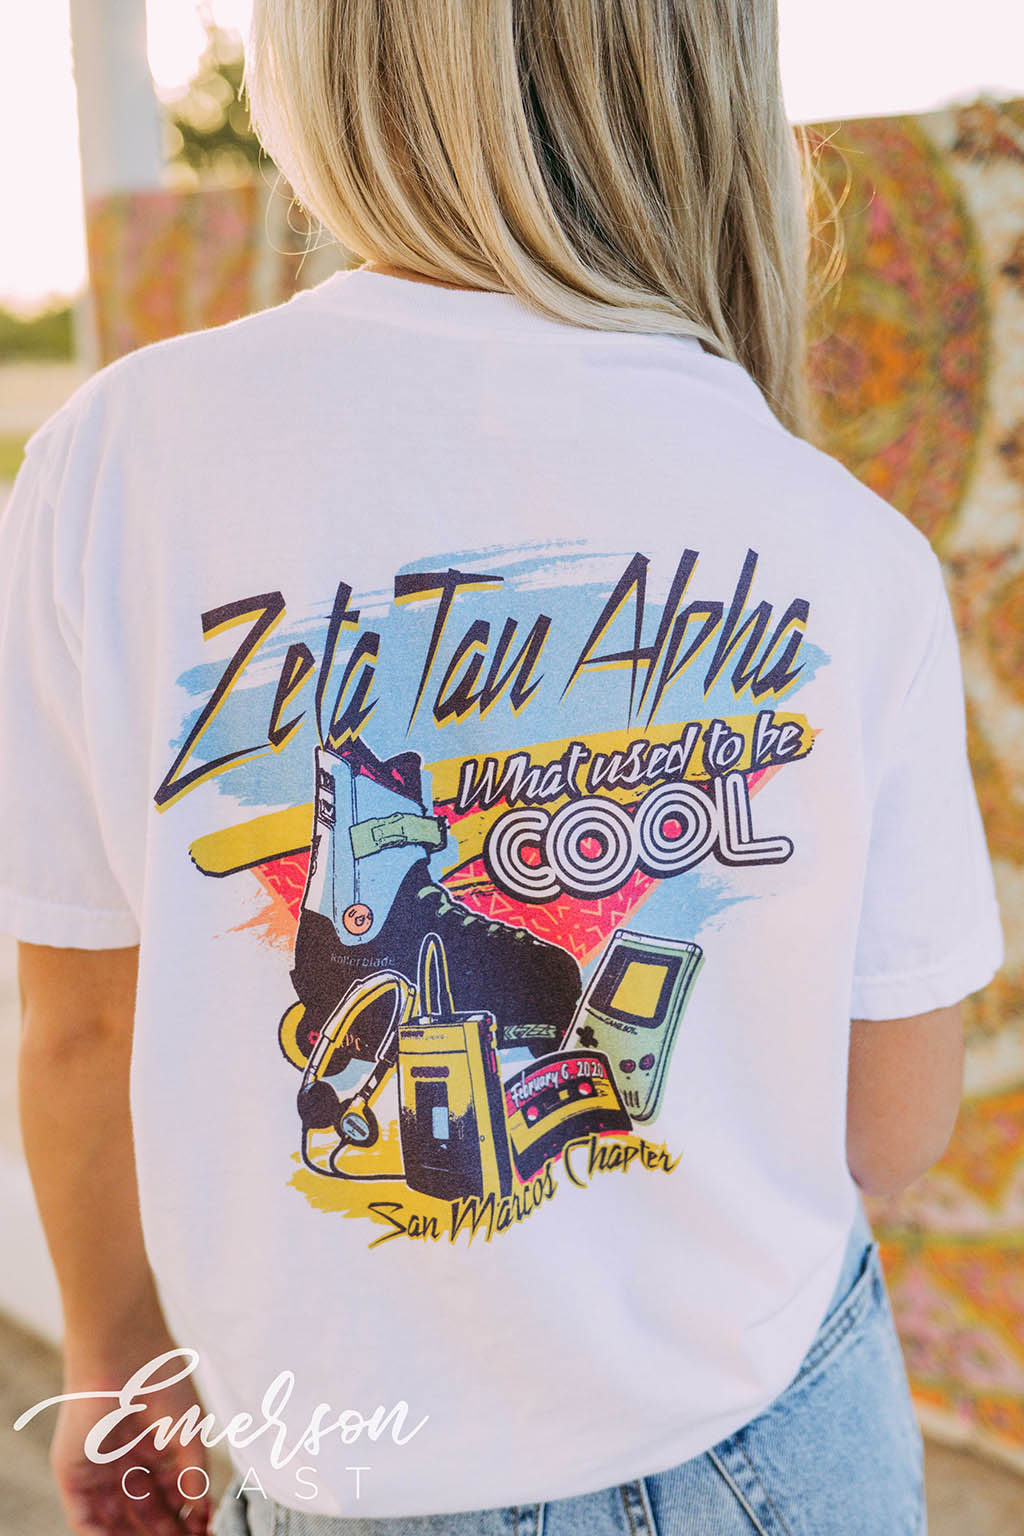 Zeta Tau Alpha Function What Used To Be Cool Tee